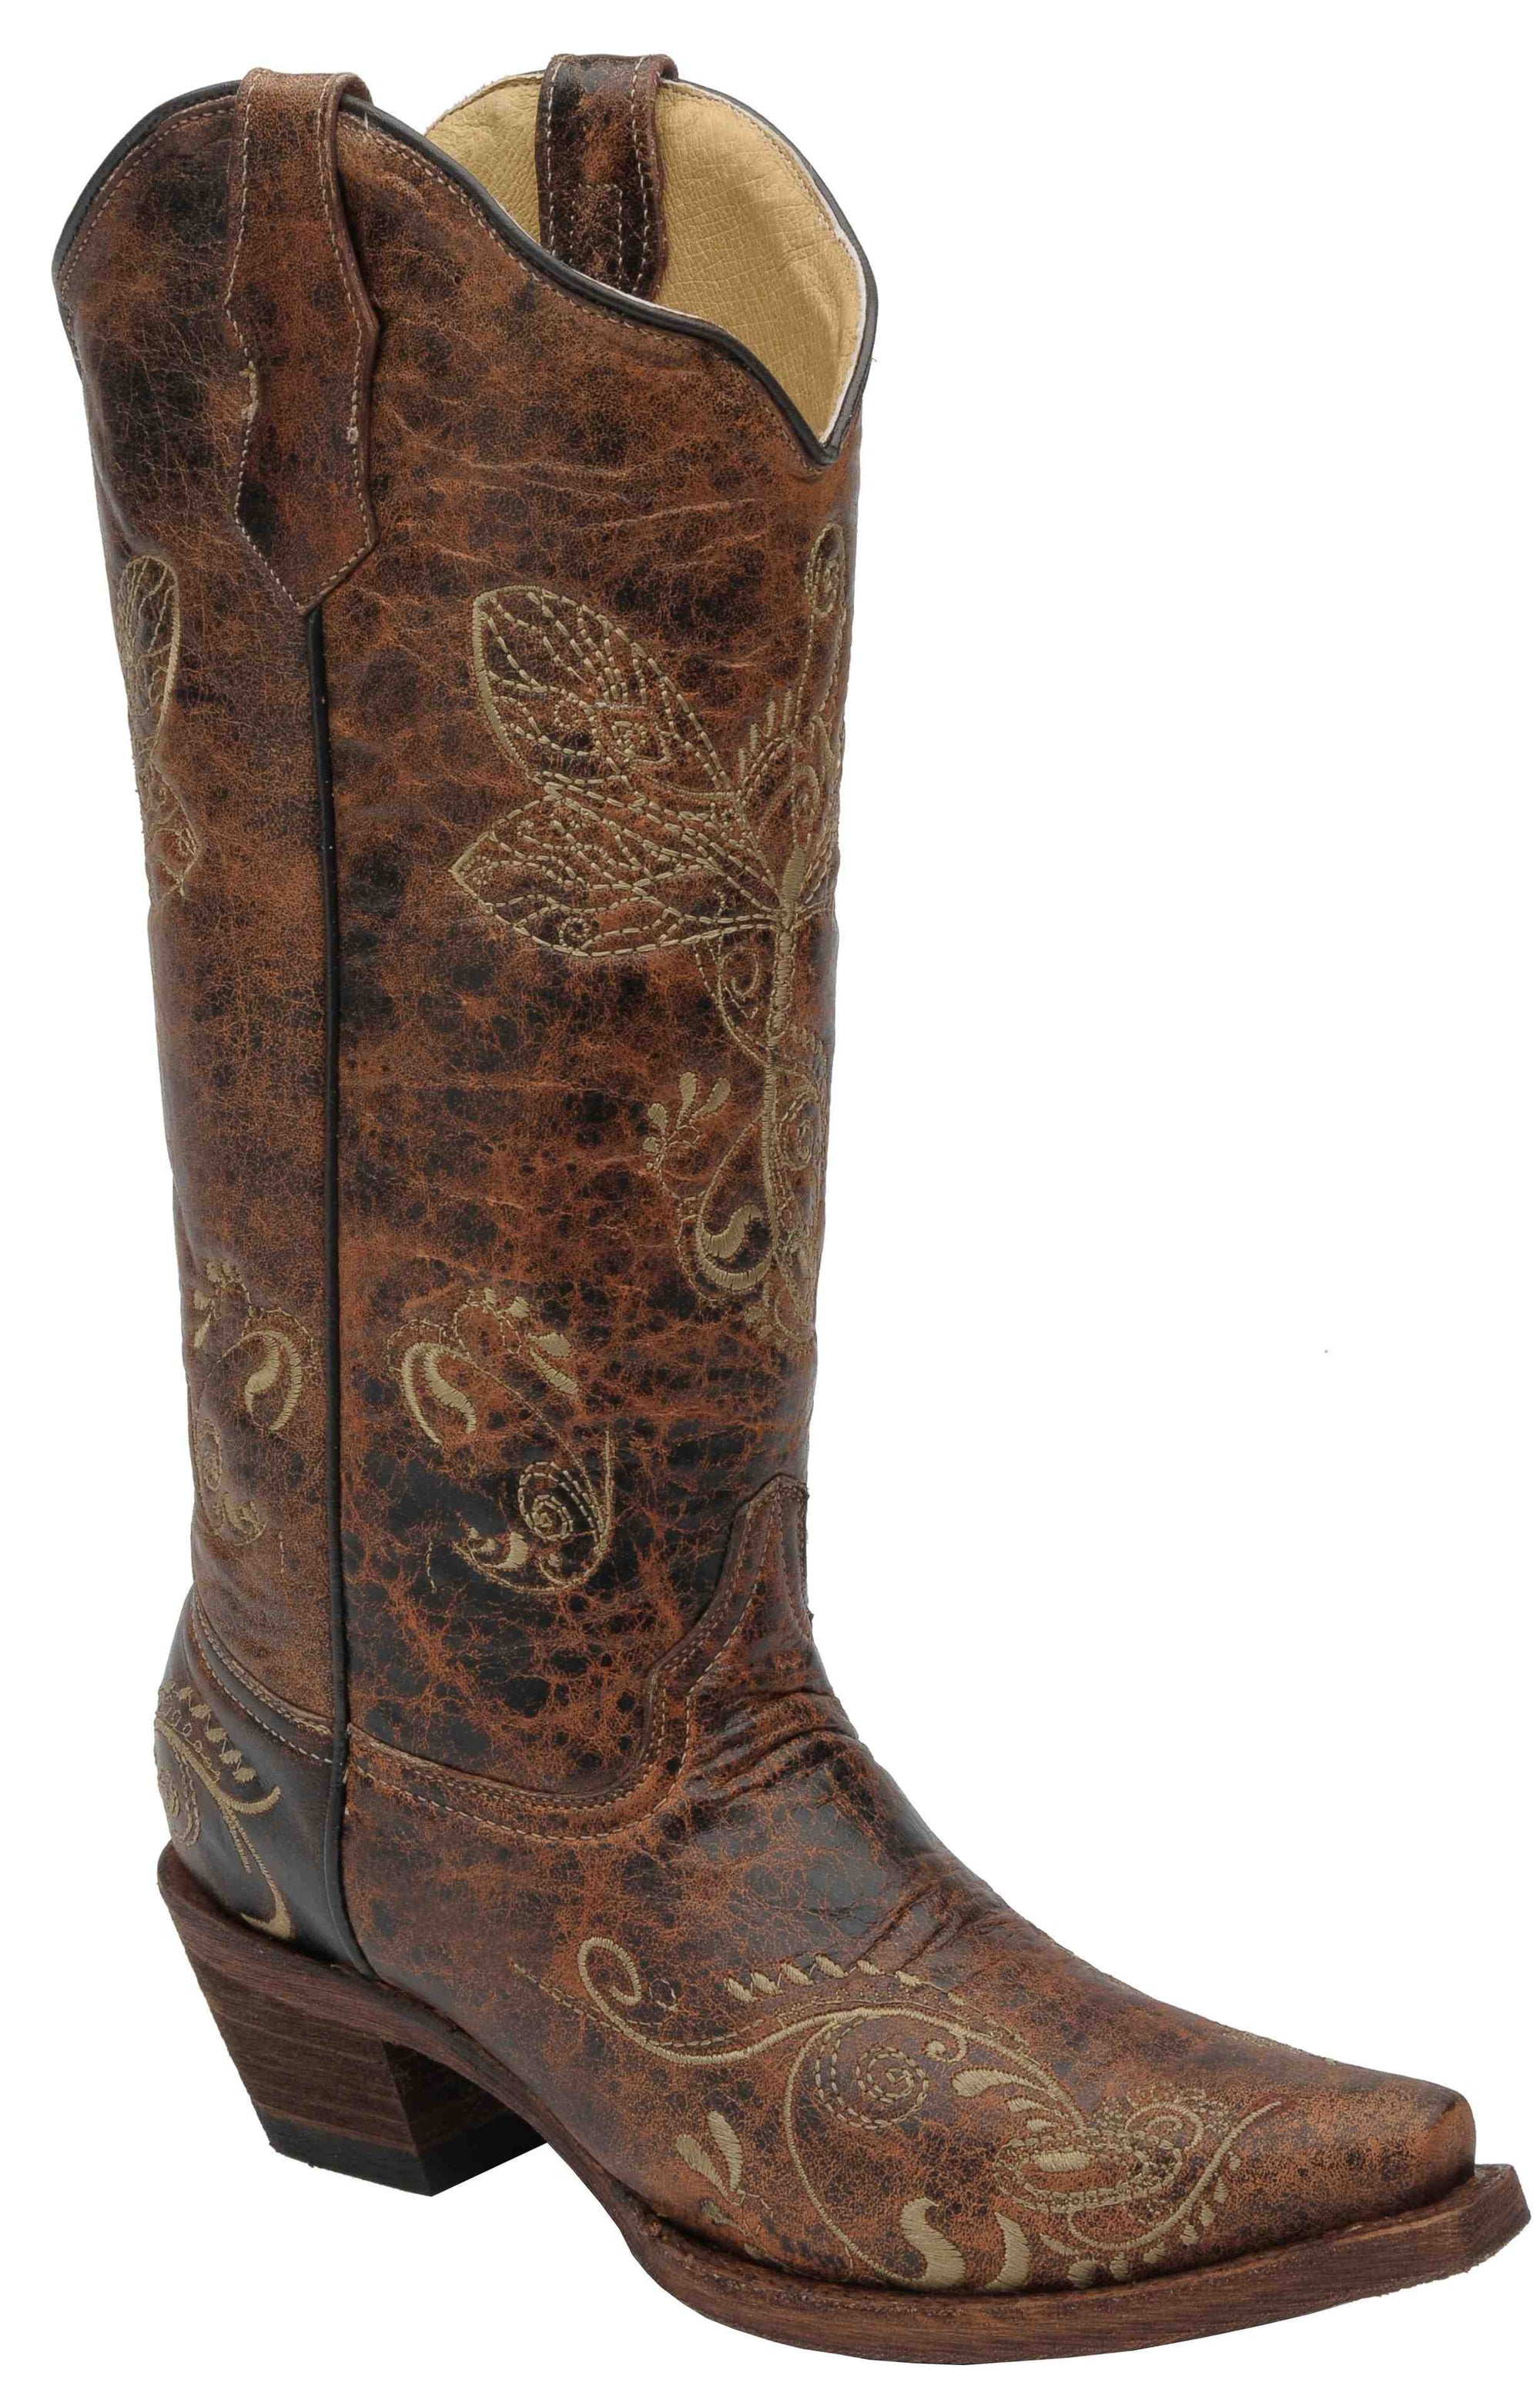 CORRAL BOOTS Boots Corral Women's Circle G Distressed Dragonfly Embroidered Cowboy Boots L5001